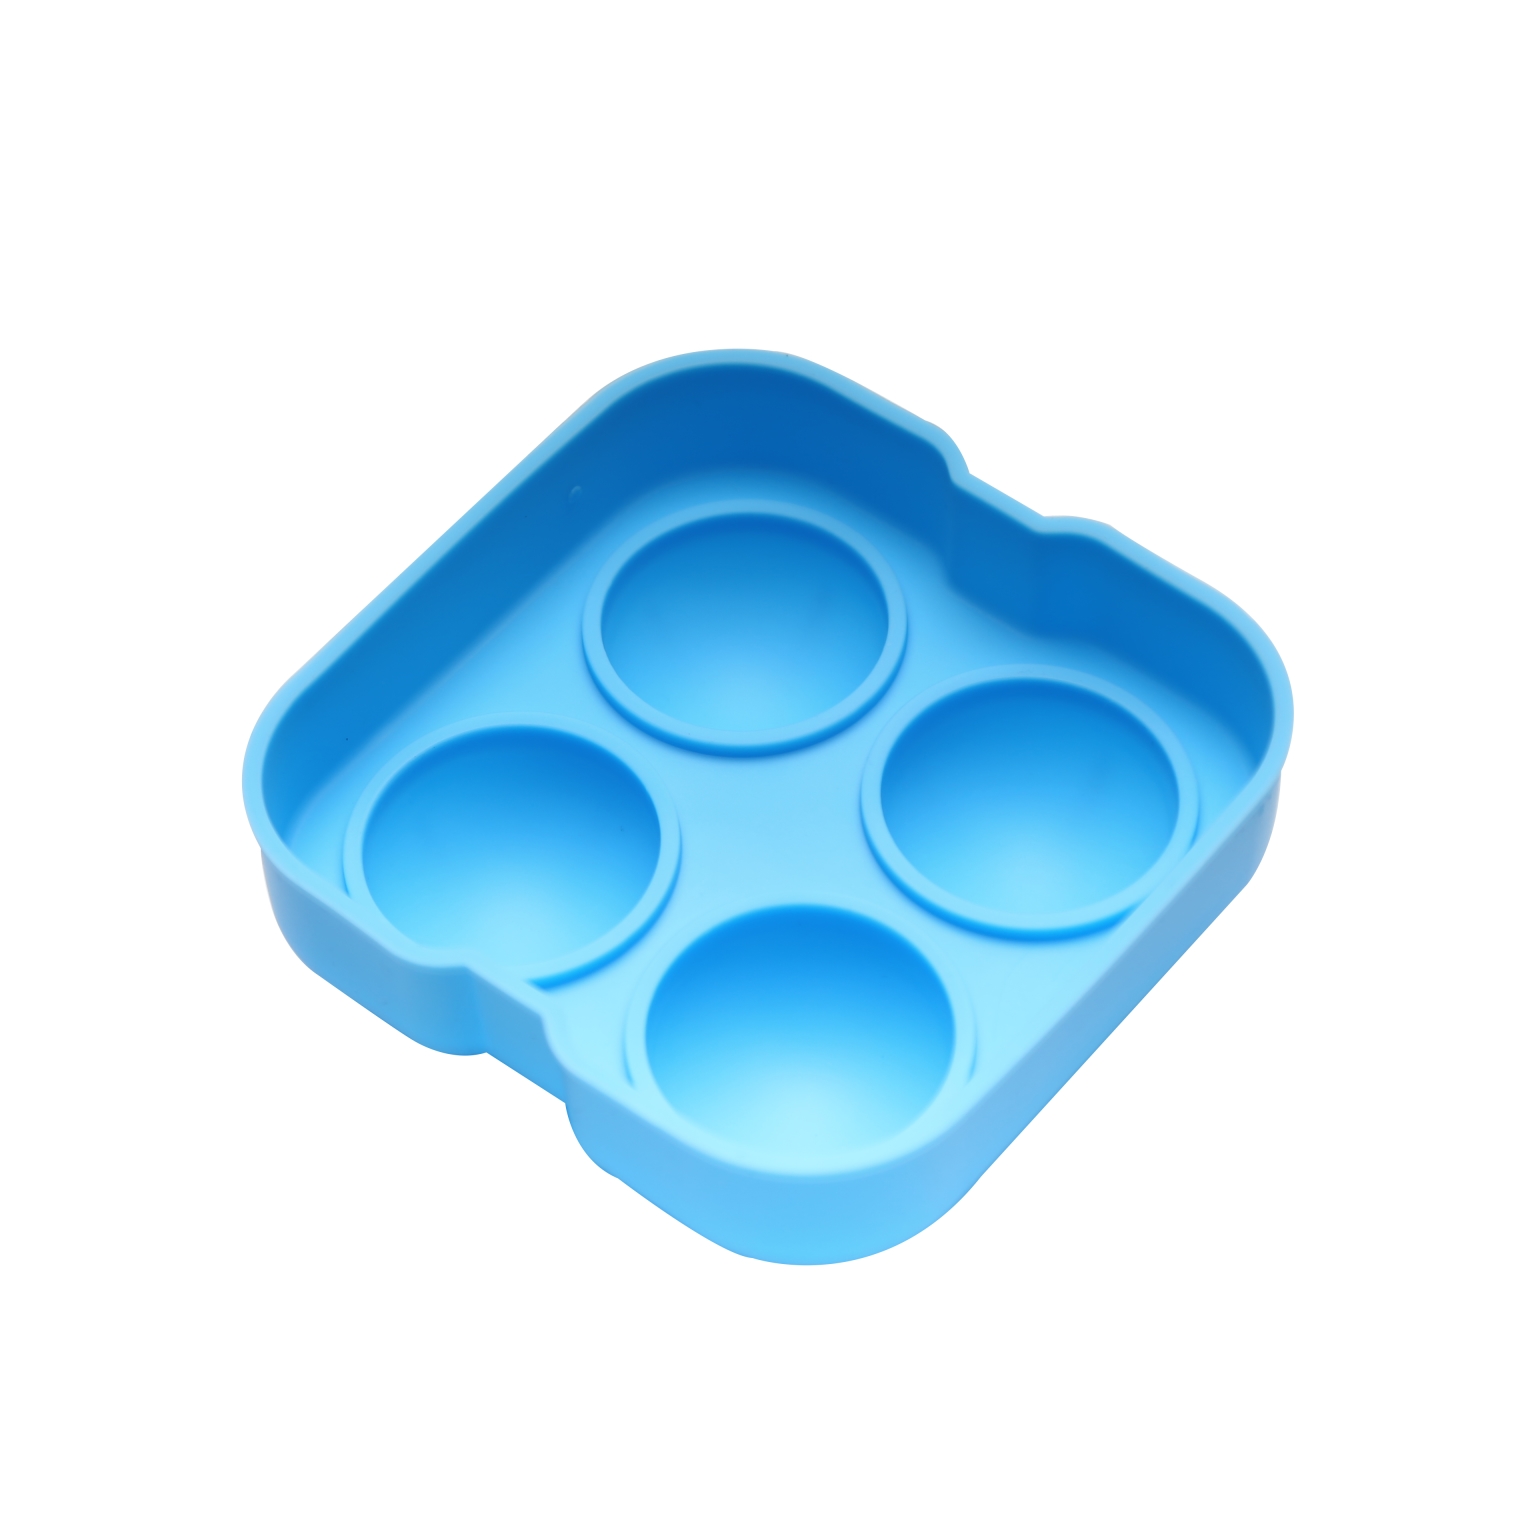 Customized high quality silicone ice ball mold with 4 ball